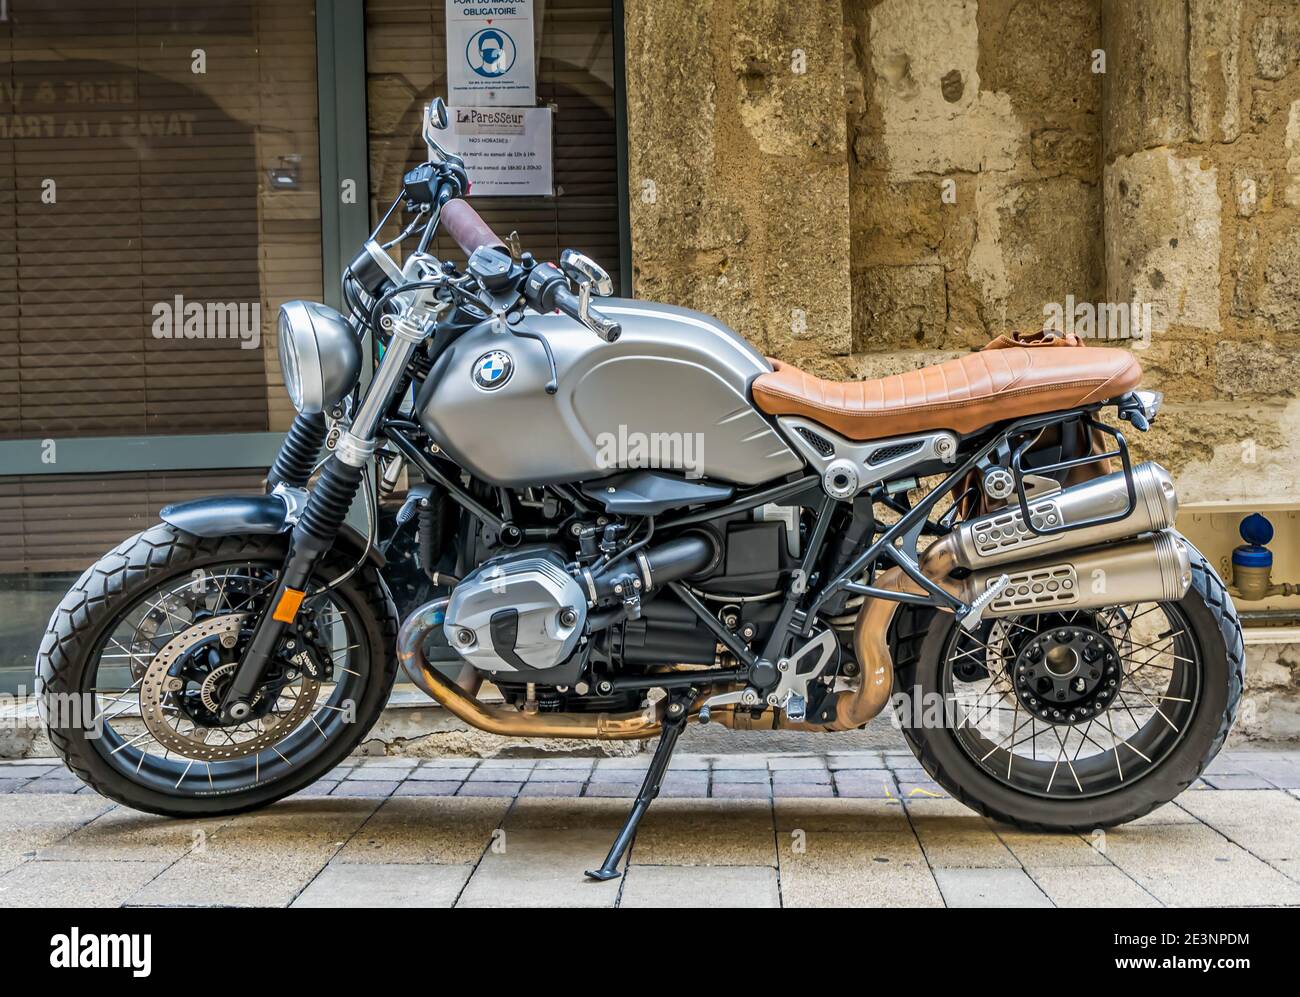 BMW motorcycle on a cobbled street in a french city. Stock Photo